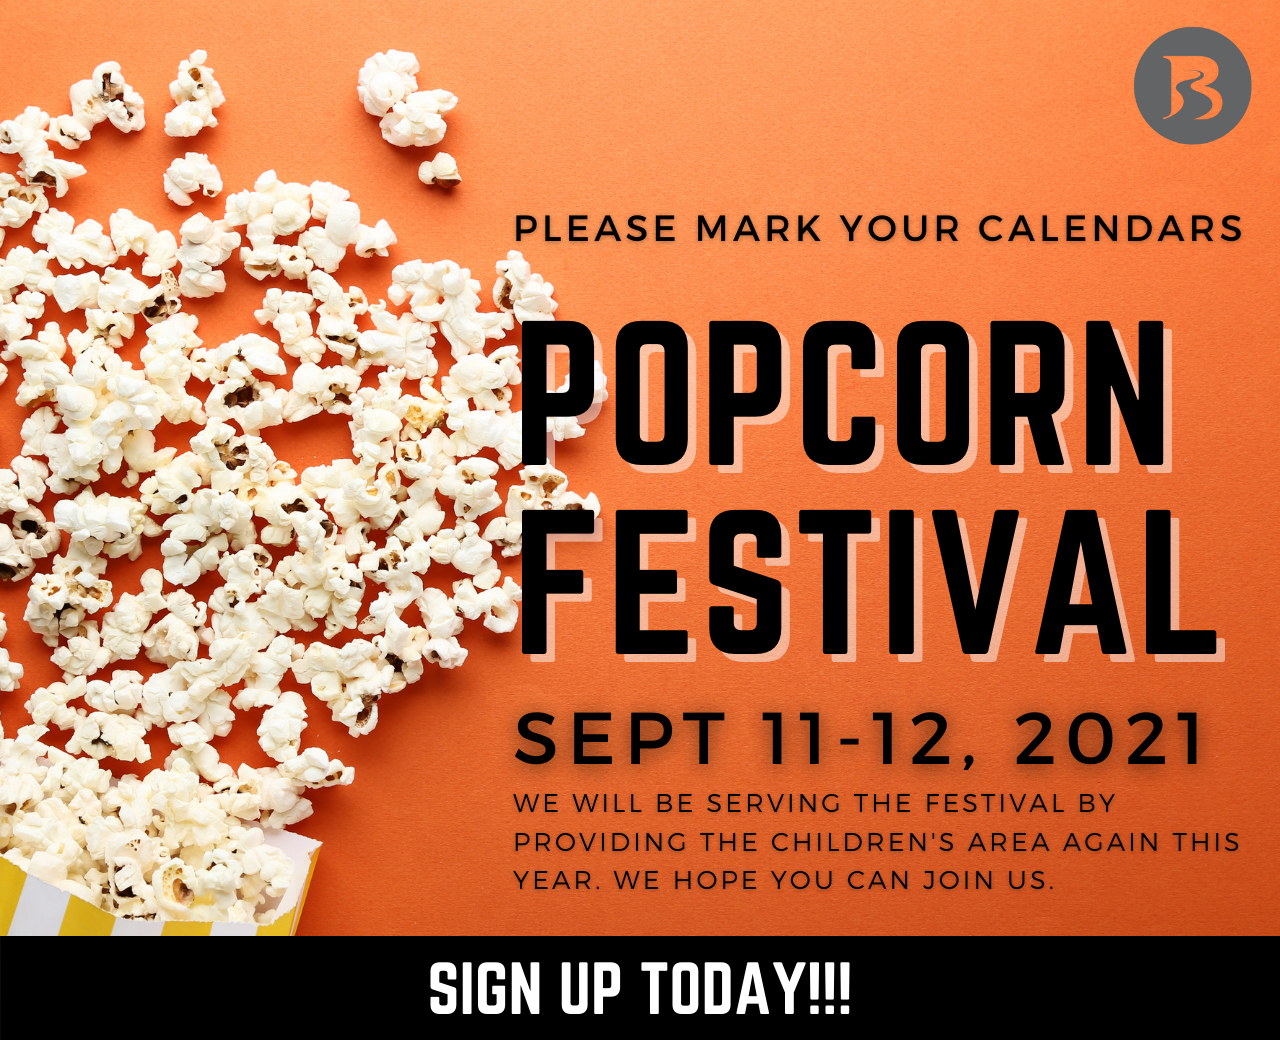 Popcorn Festival Sign Up today!